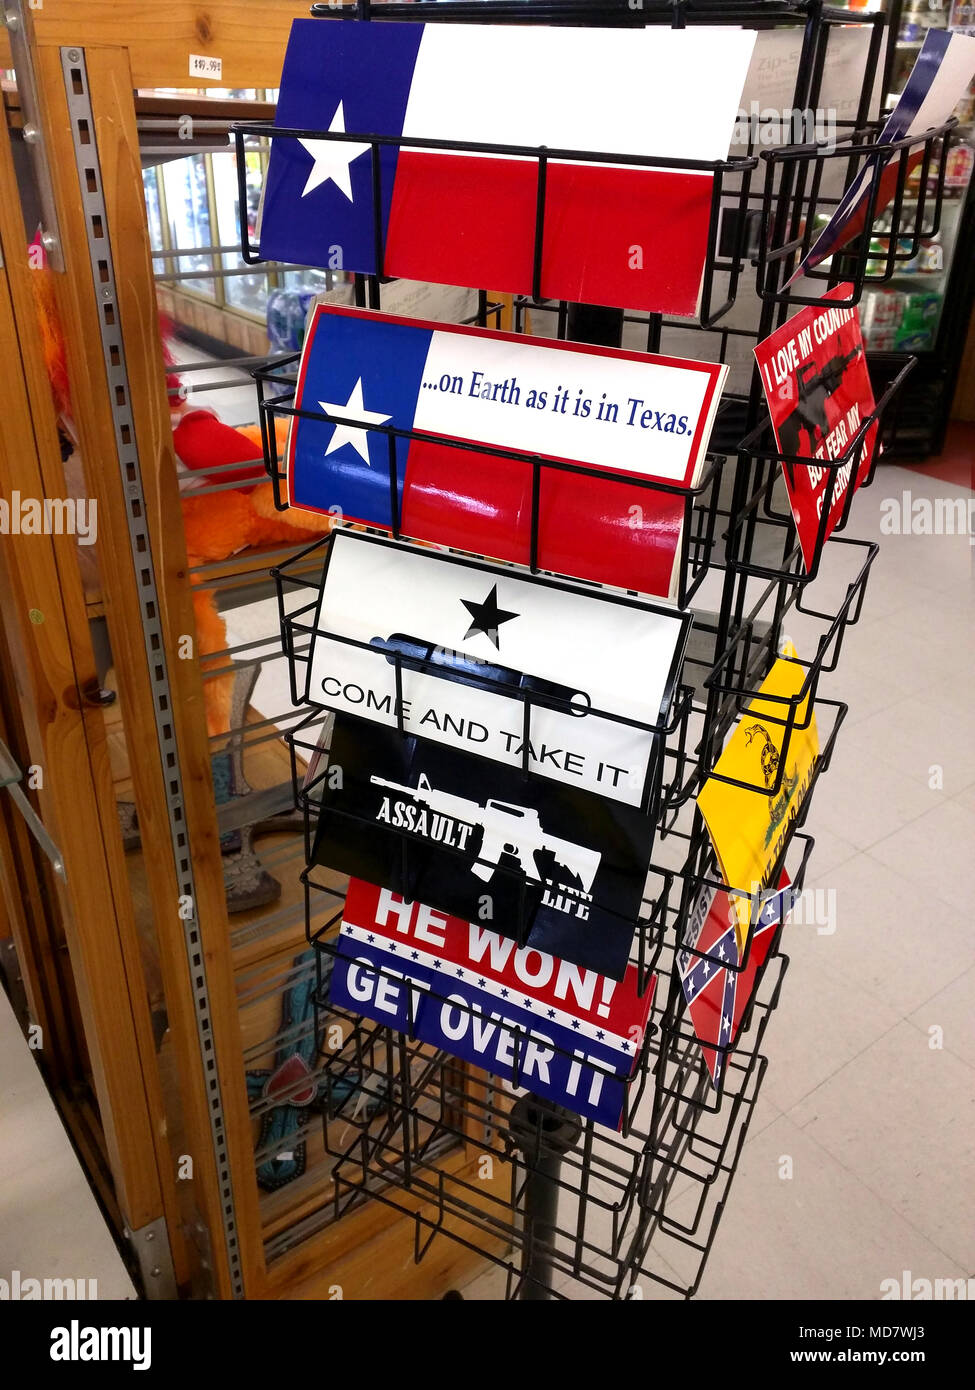 In a small town of Oklaunion, Texas, the convenience store along US 287 offers everything from gas, fried chicken, milk and bumper stickers. Bumper stickers that express their rural view on America and pride in being a Texan. Stock Photo